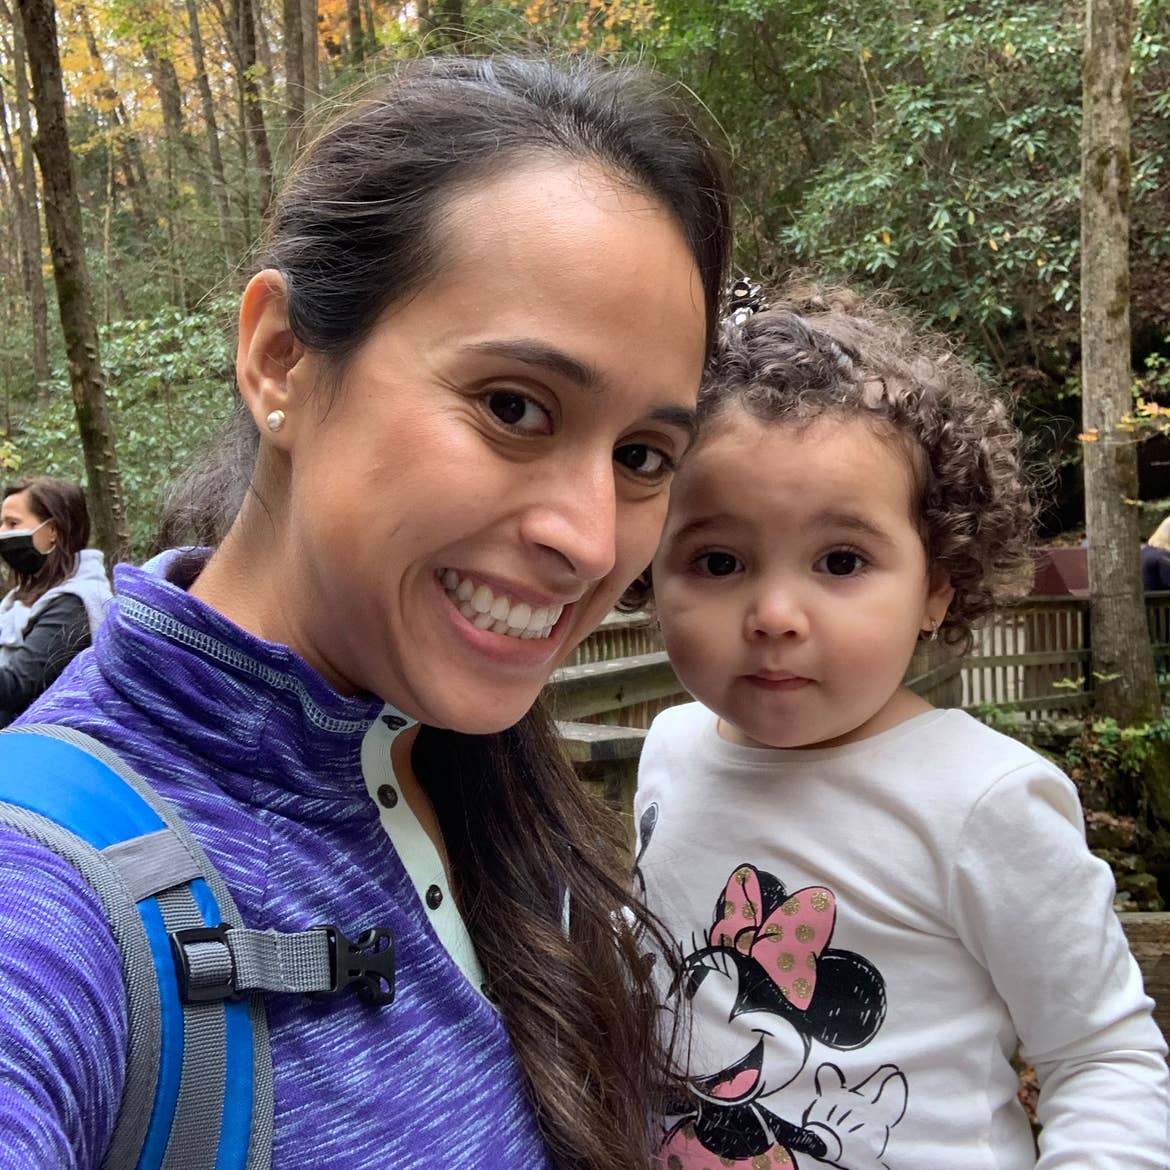 Featured author, Andrea Beltran (left), poses with her niece (right) surrounded by dropped fall foliage.